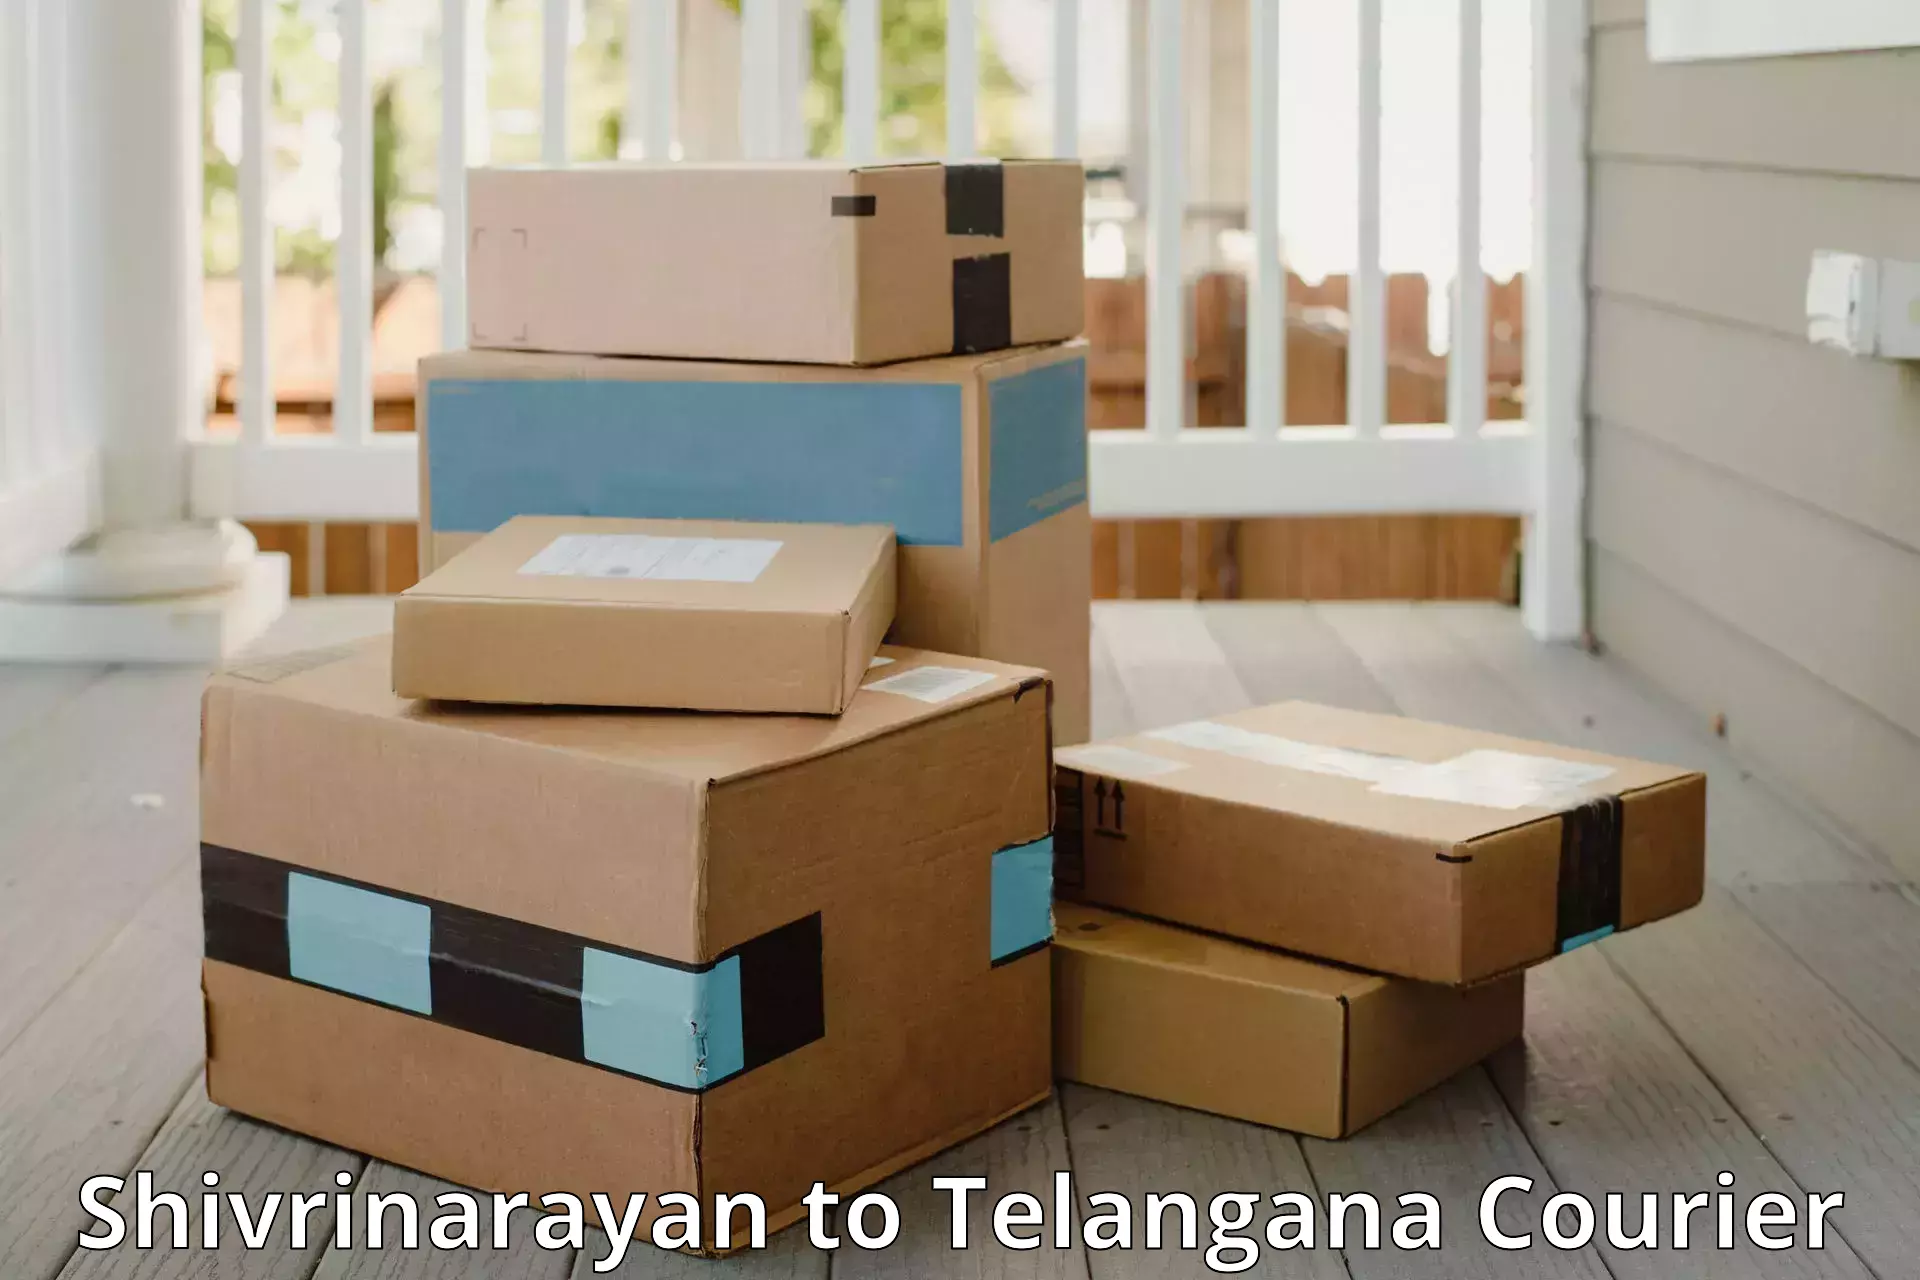 Business luggage transport in Shivrinarayan to Secunderabad